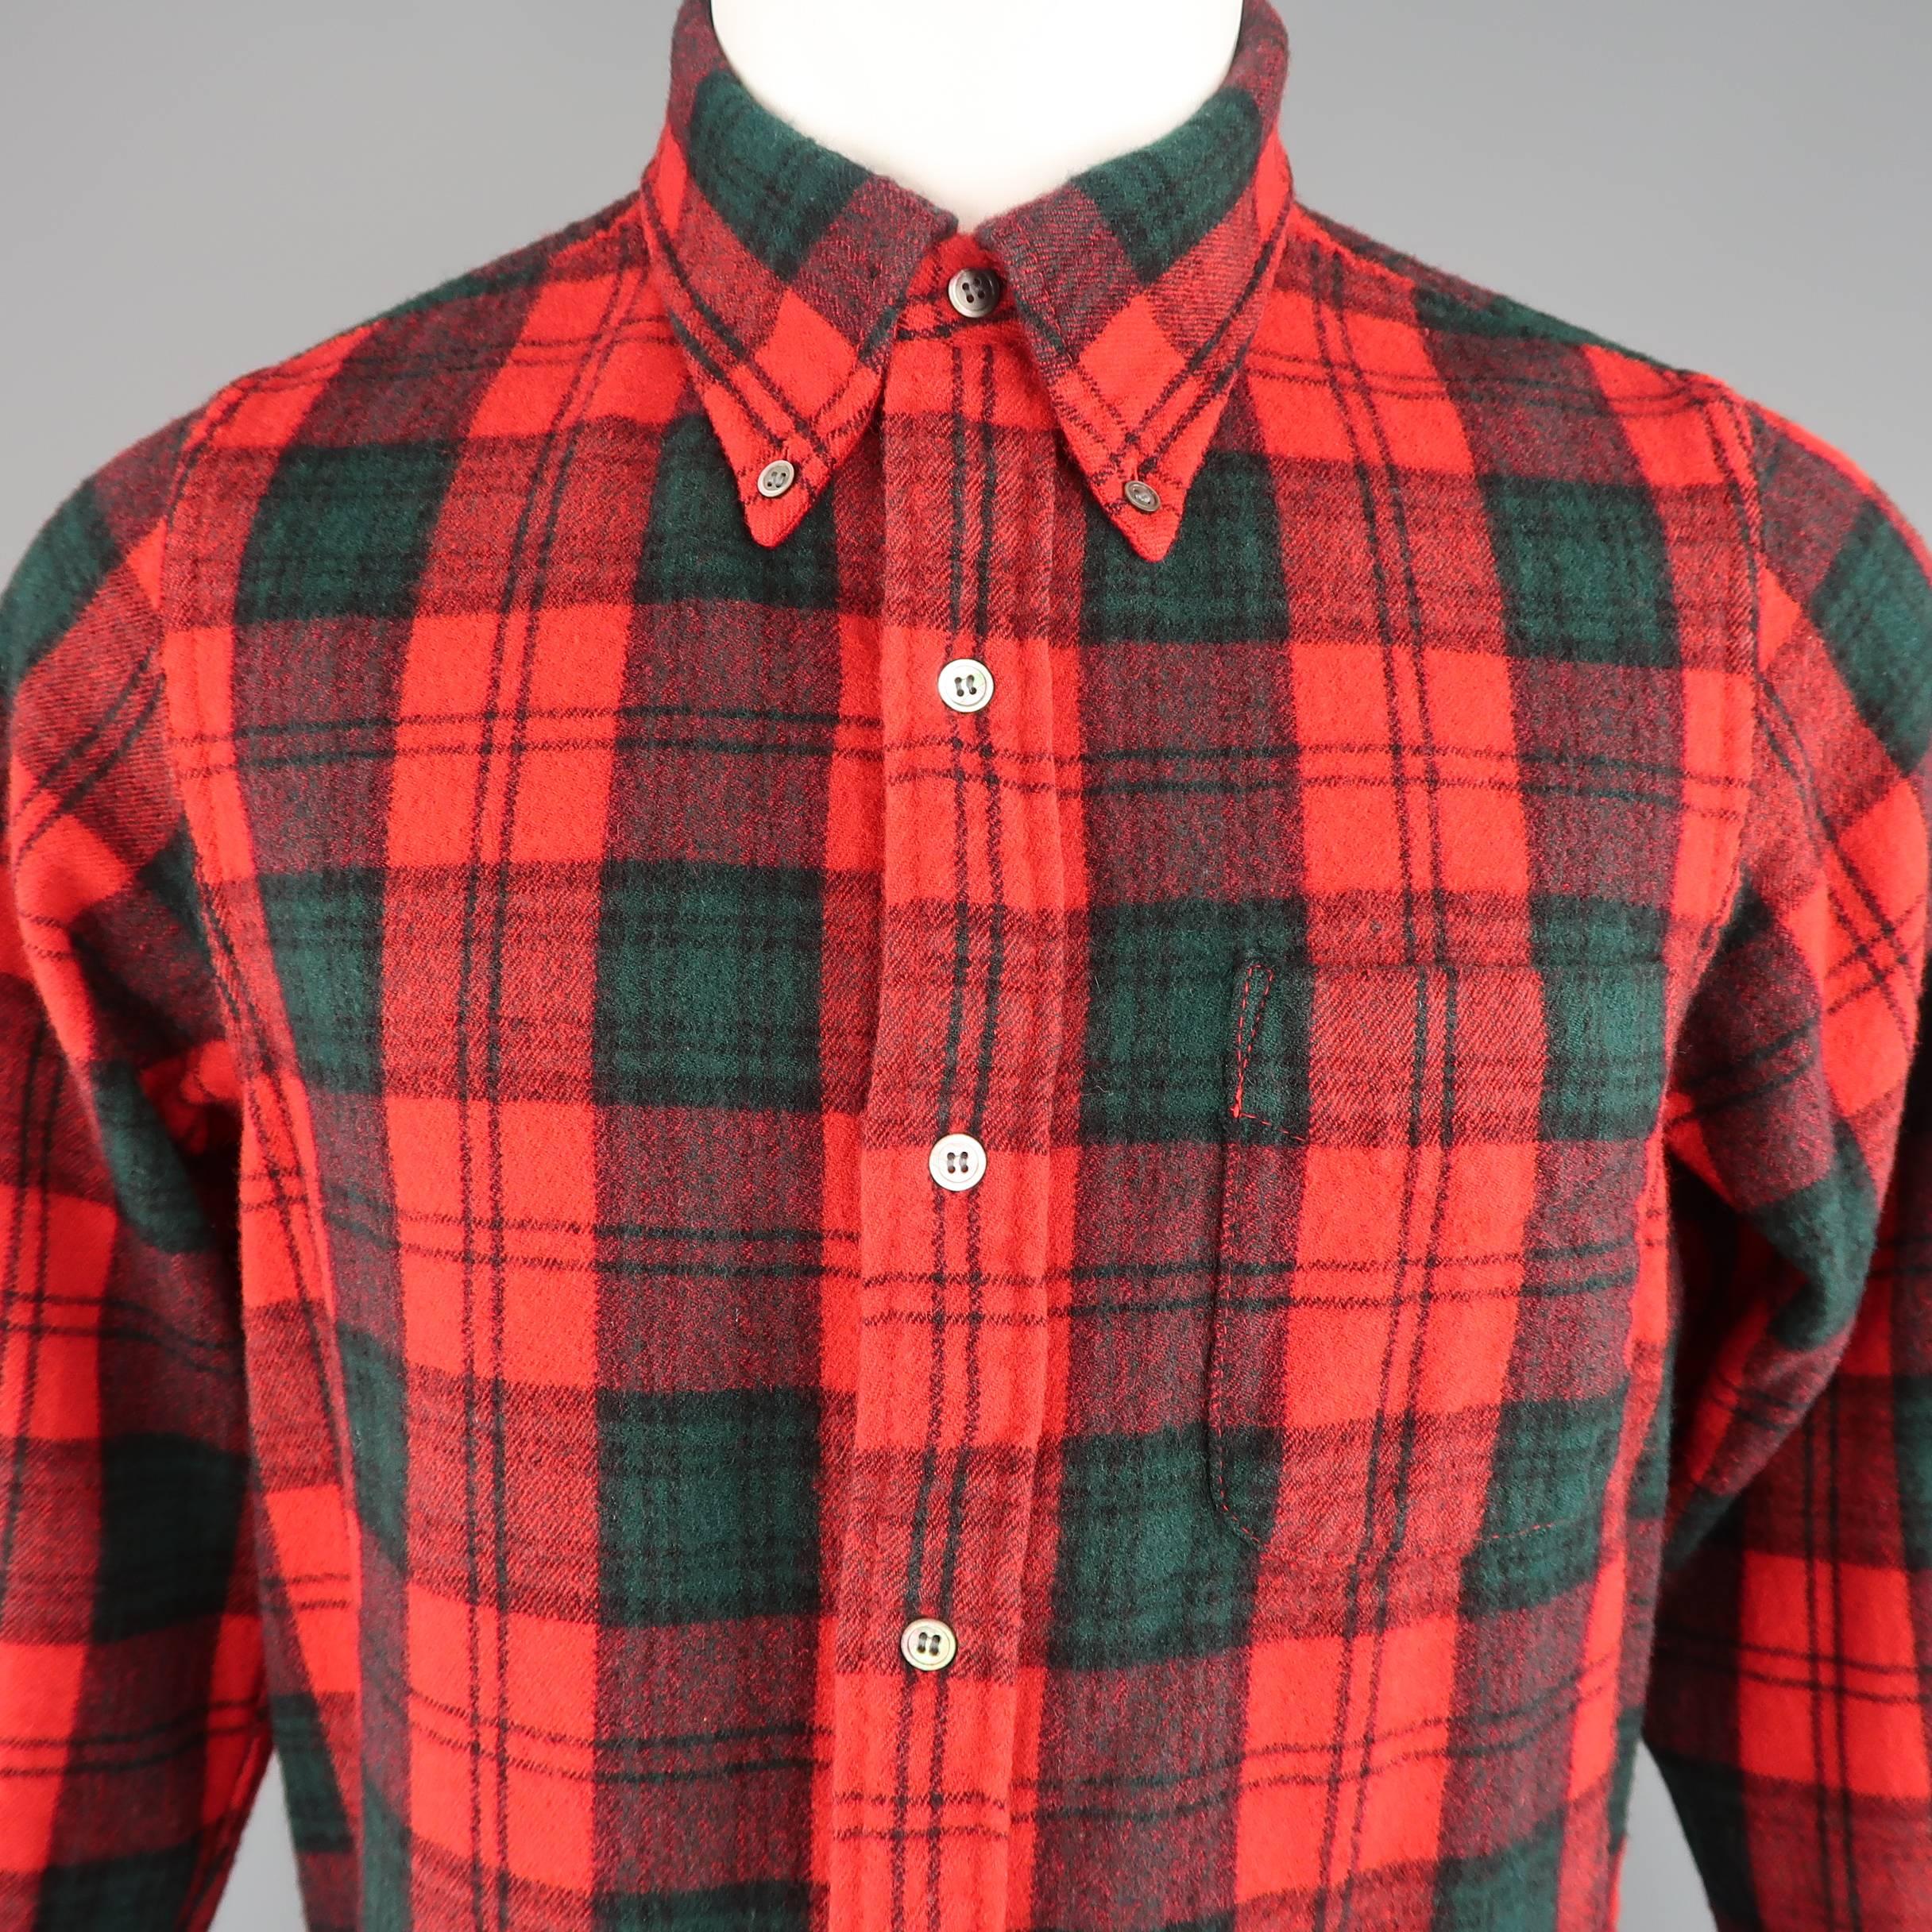 JUNYA WATANABE MAN shirt comes in red and green plaid wool blend flannel with a button down pointed collar and patch pocket. Made in Japan.
 
Excellent Pre-Owned Condition.
Marked: S
 
Measurements:
 
Shoulder: 15 in.
Chest: 42 in.
Sleeve: 25